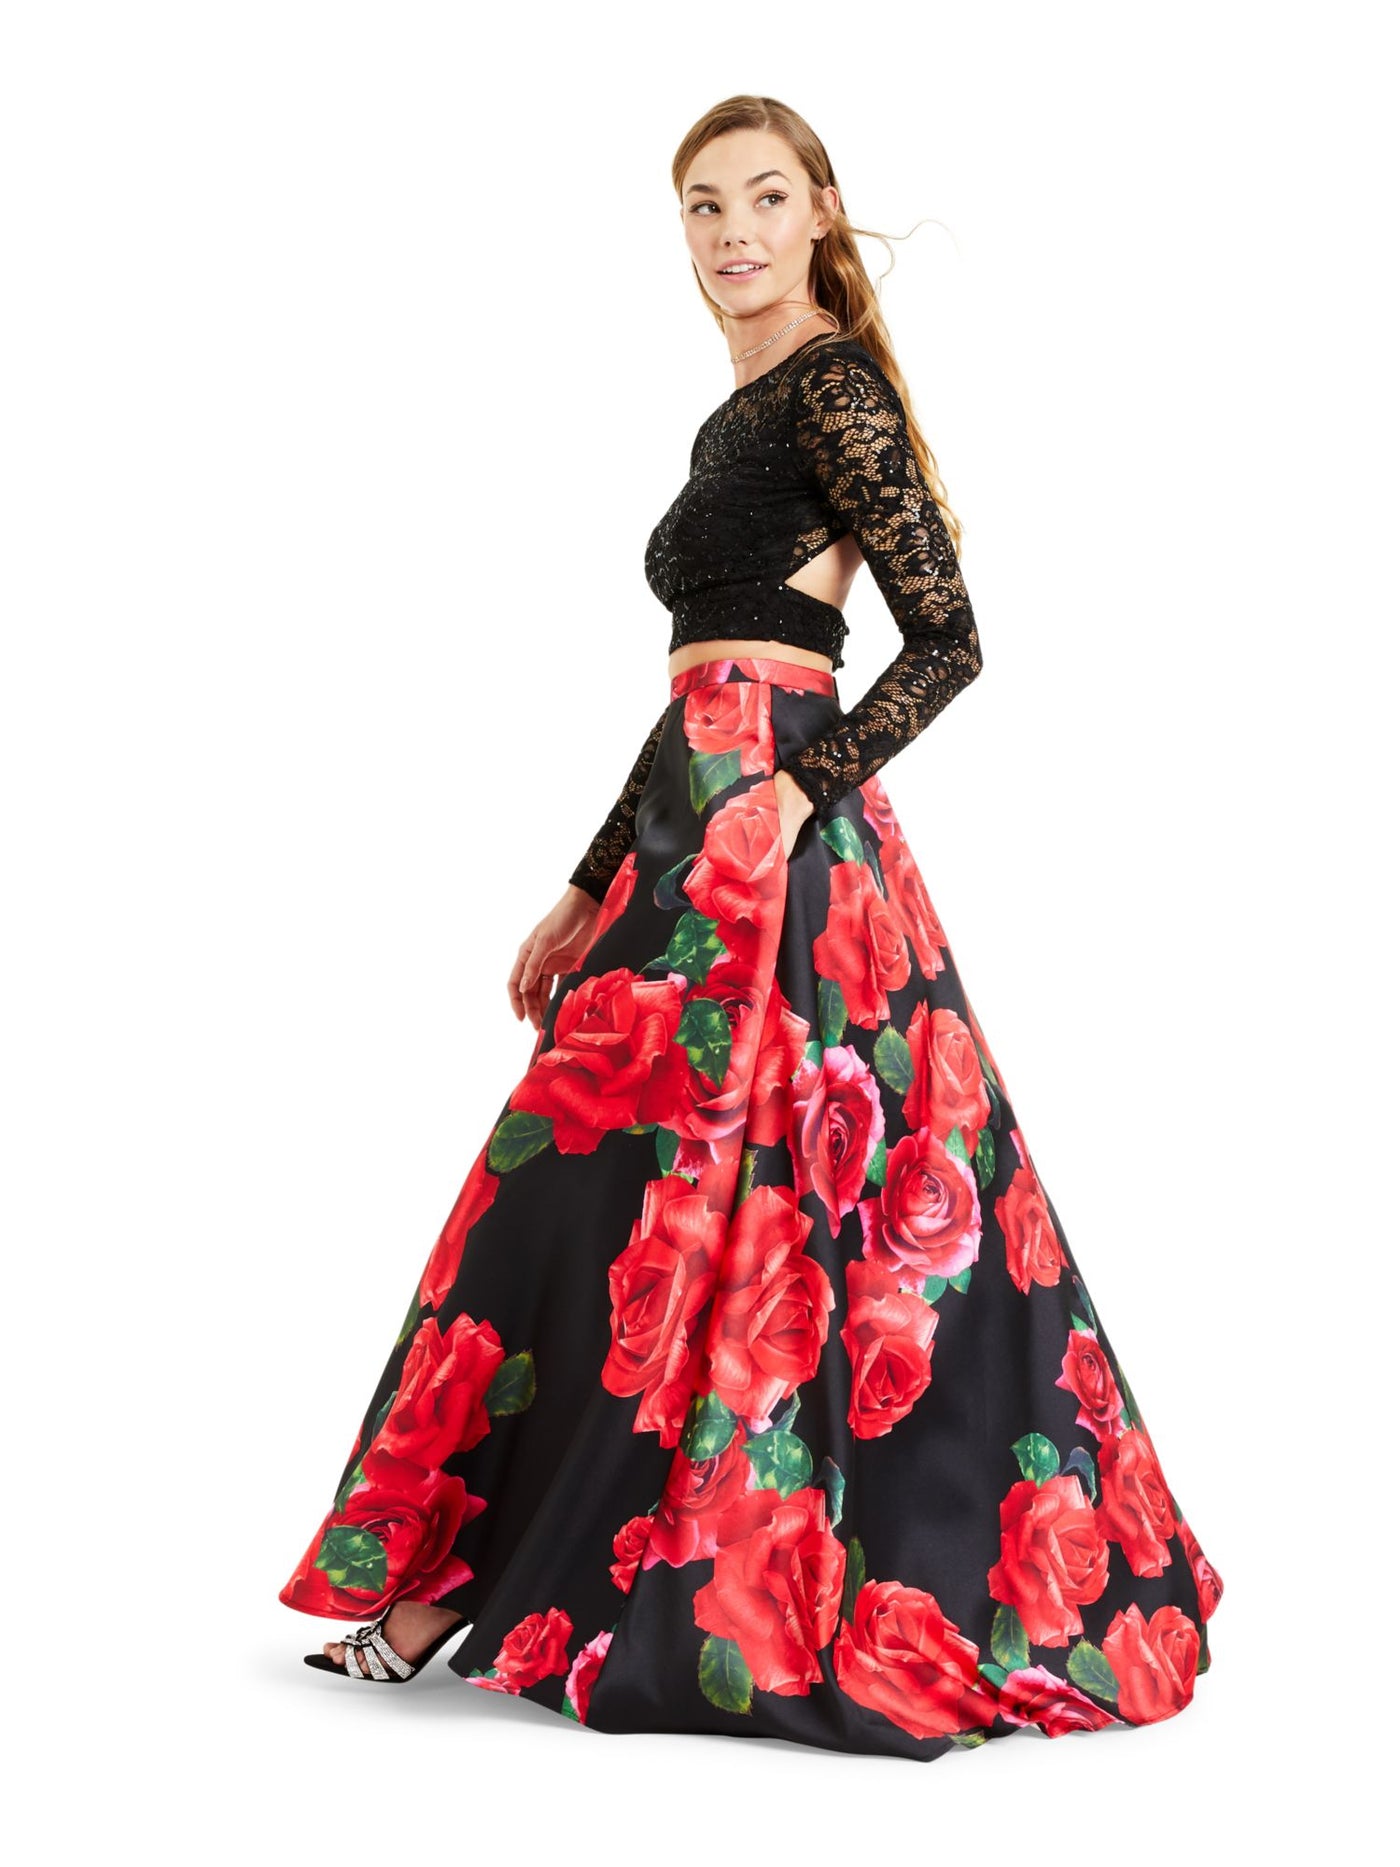 B DARLIN Womens Sequined Floral Long Sleeve Scoop Neck Full-Length Prom Fit + Flare Crop Top Dress Juniors